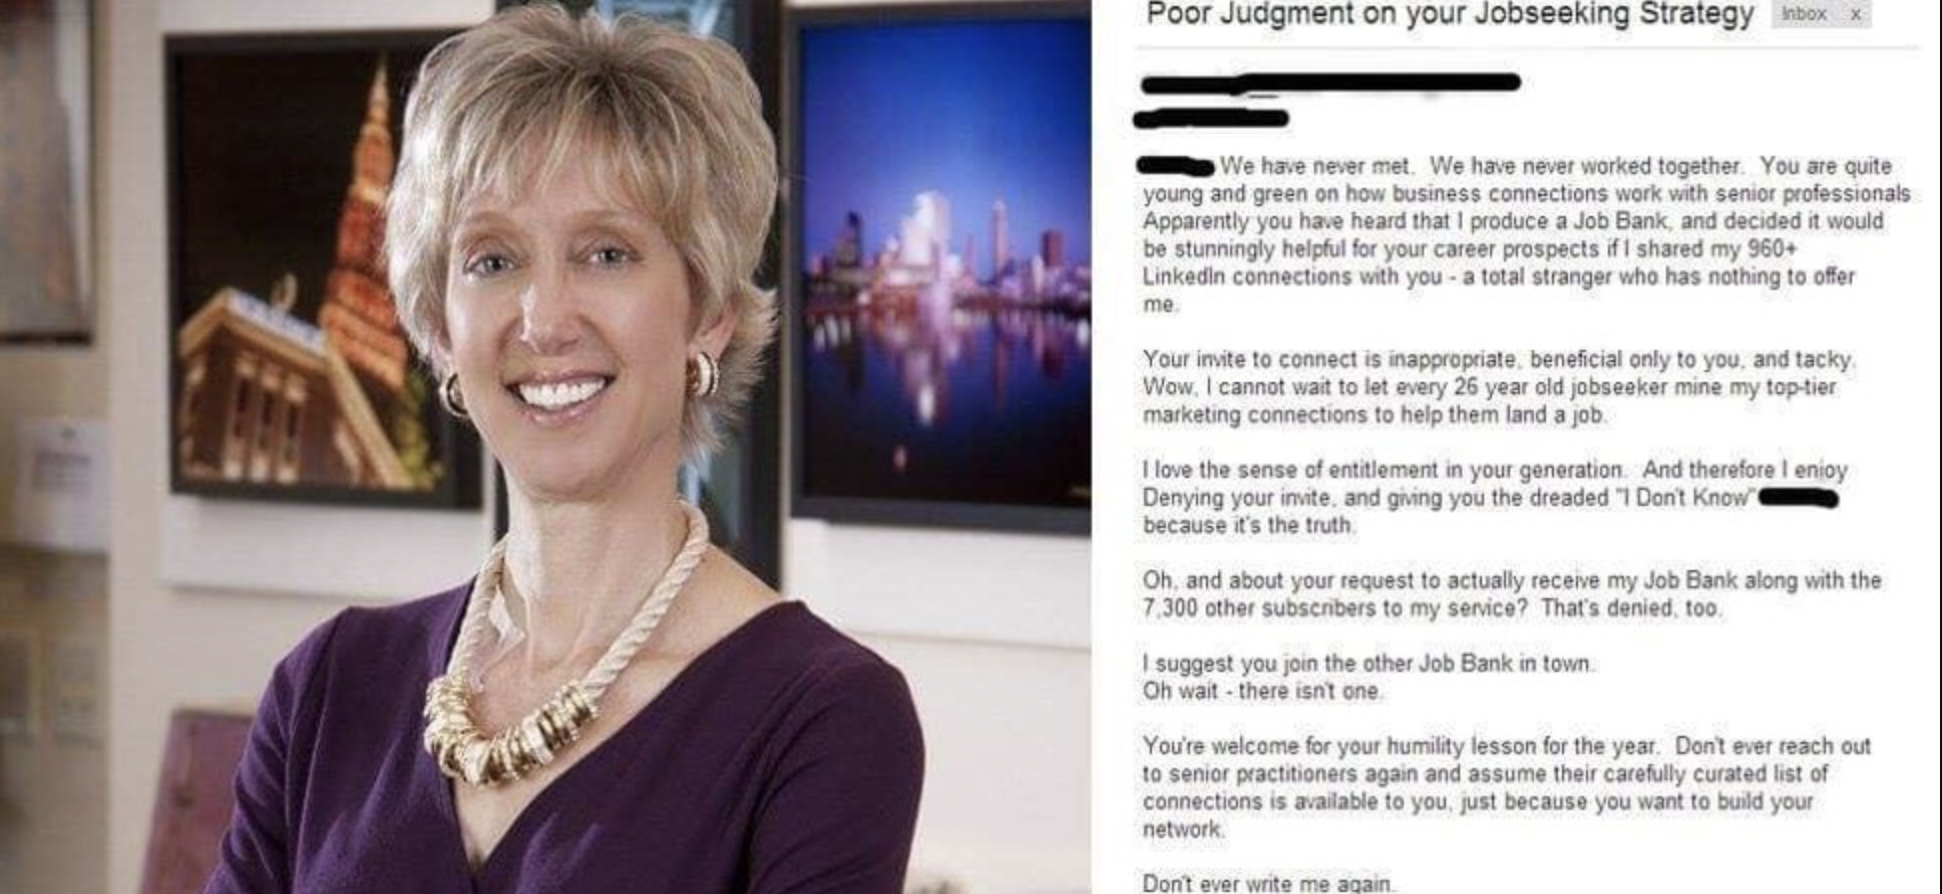 Trashy pics - Poor Judgment on your Jobseeking Strategy We have never met. We have never worked together You are quite young and green on how business connections work with senior professionals Apparently you have heard that I produce a Job Bank, and dec